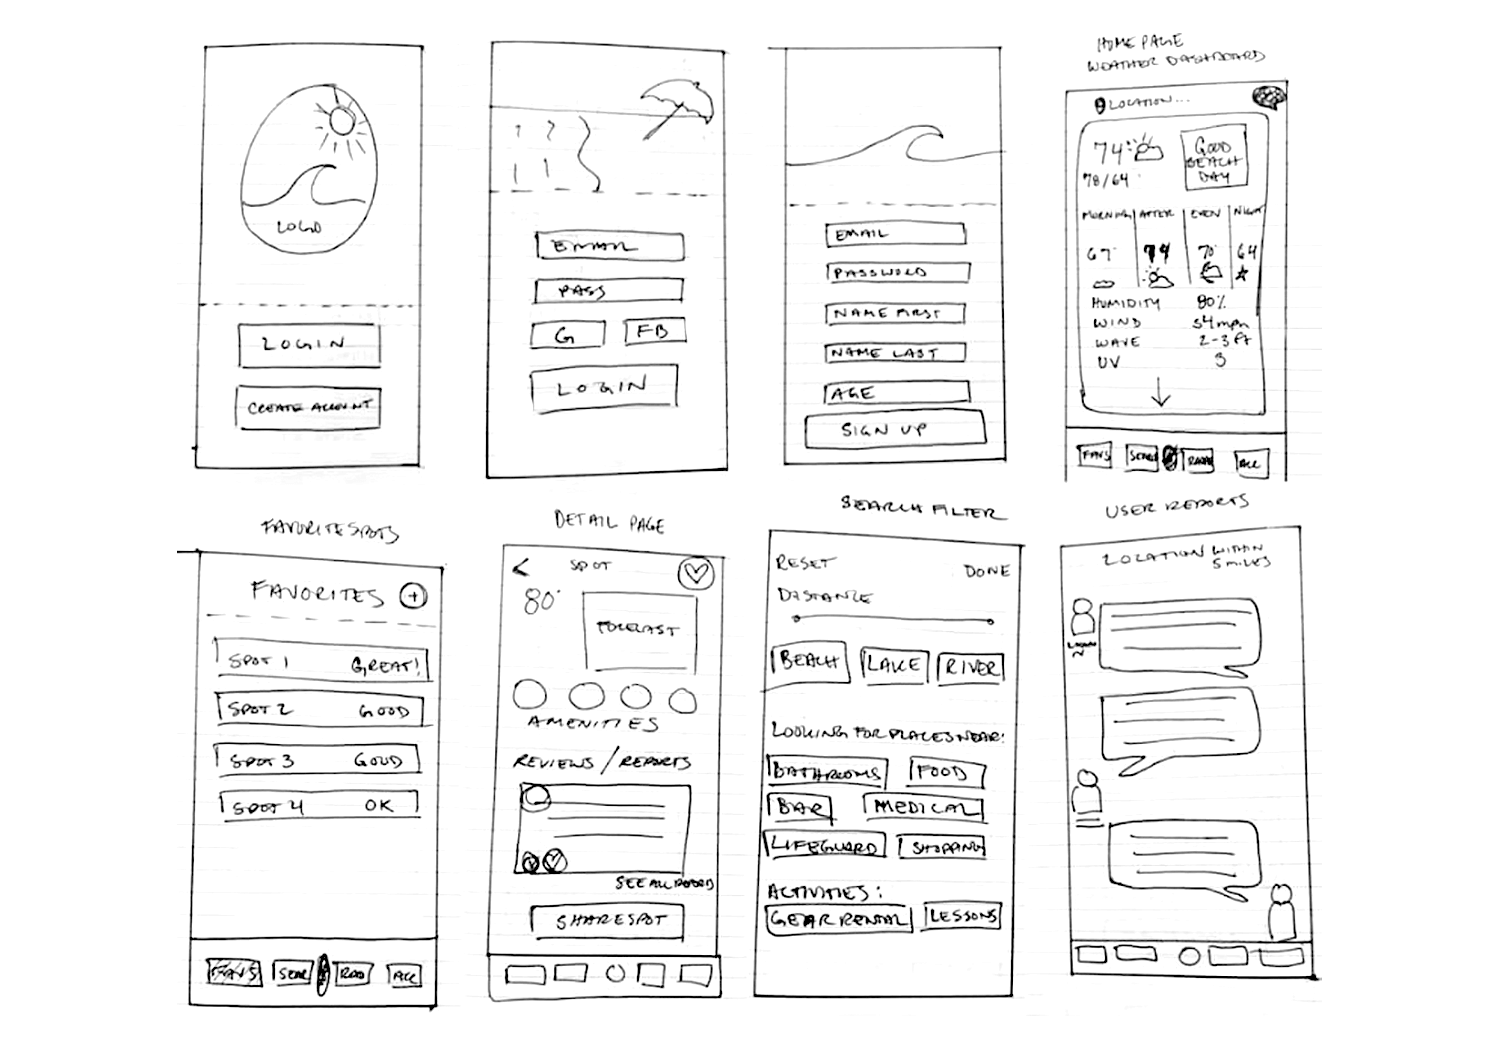 Wireframe sketches for the Sundayz app featuring login, favorites, detail views, search filters, and user feedback screens.